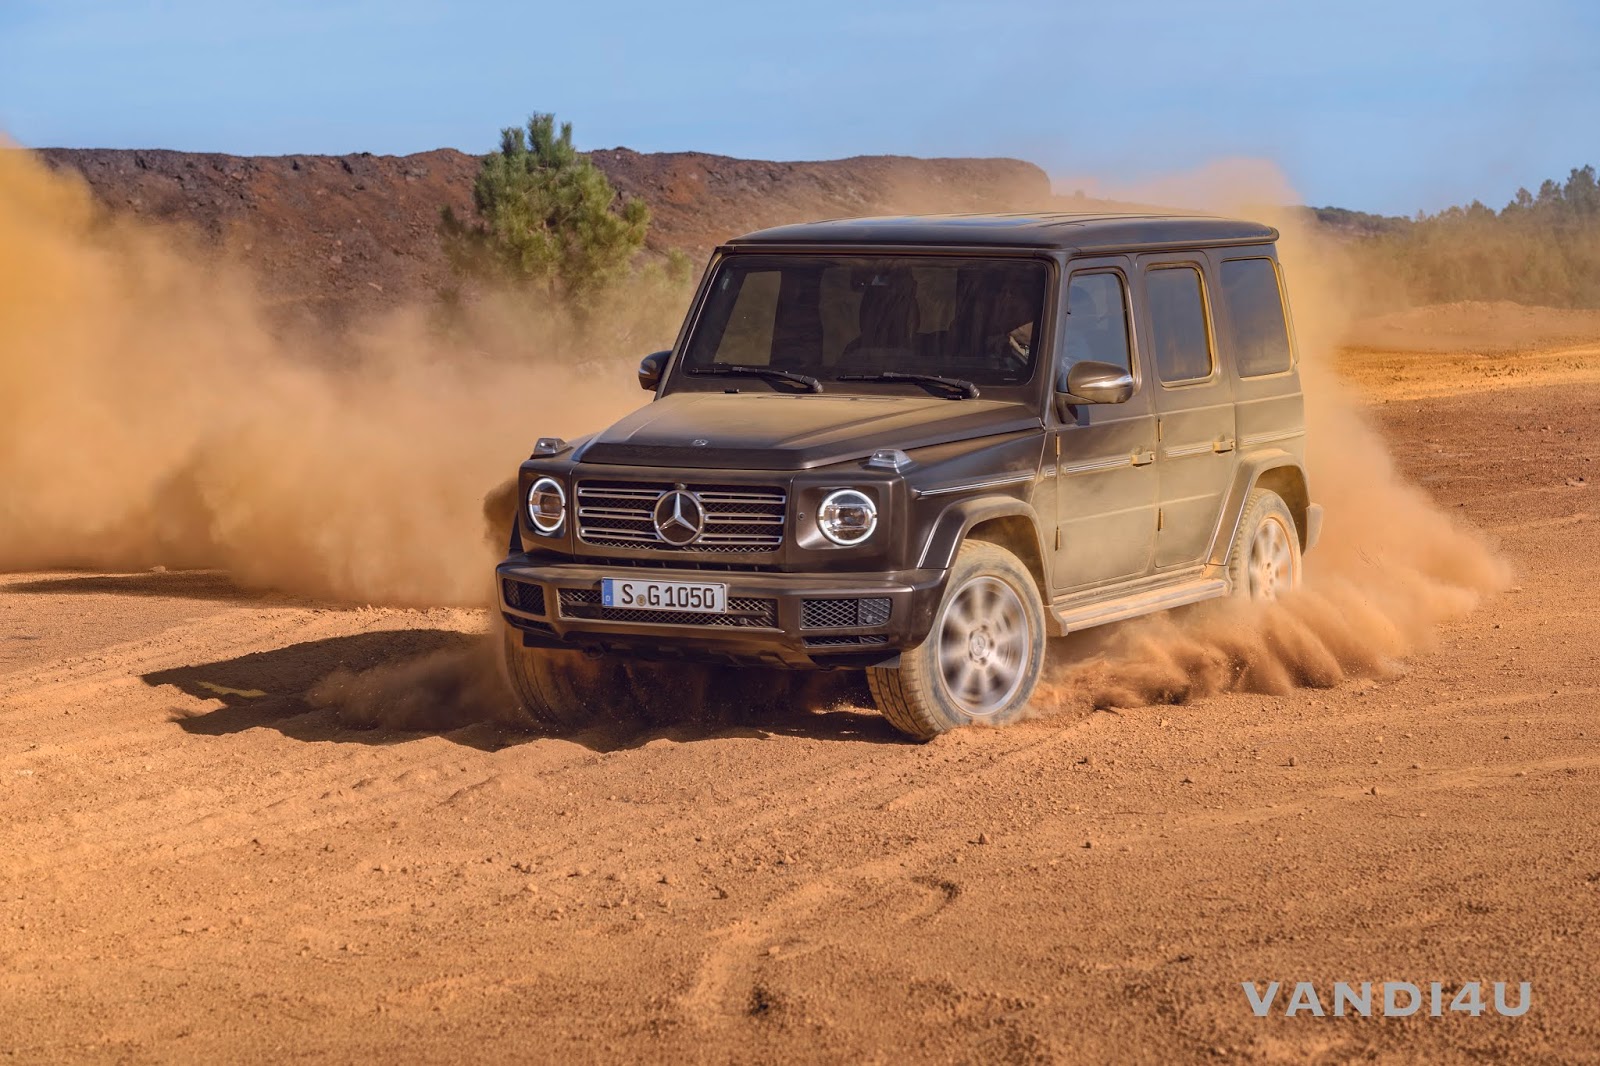 Mercedes-Benz G 350 d launched: Top 6 things to know | VANDI4U